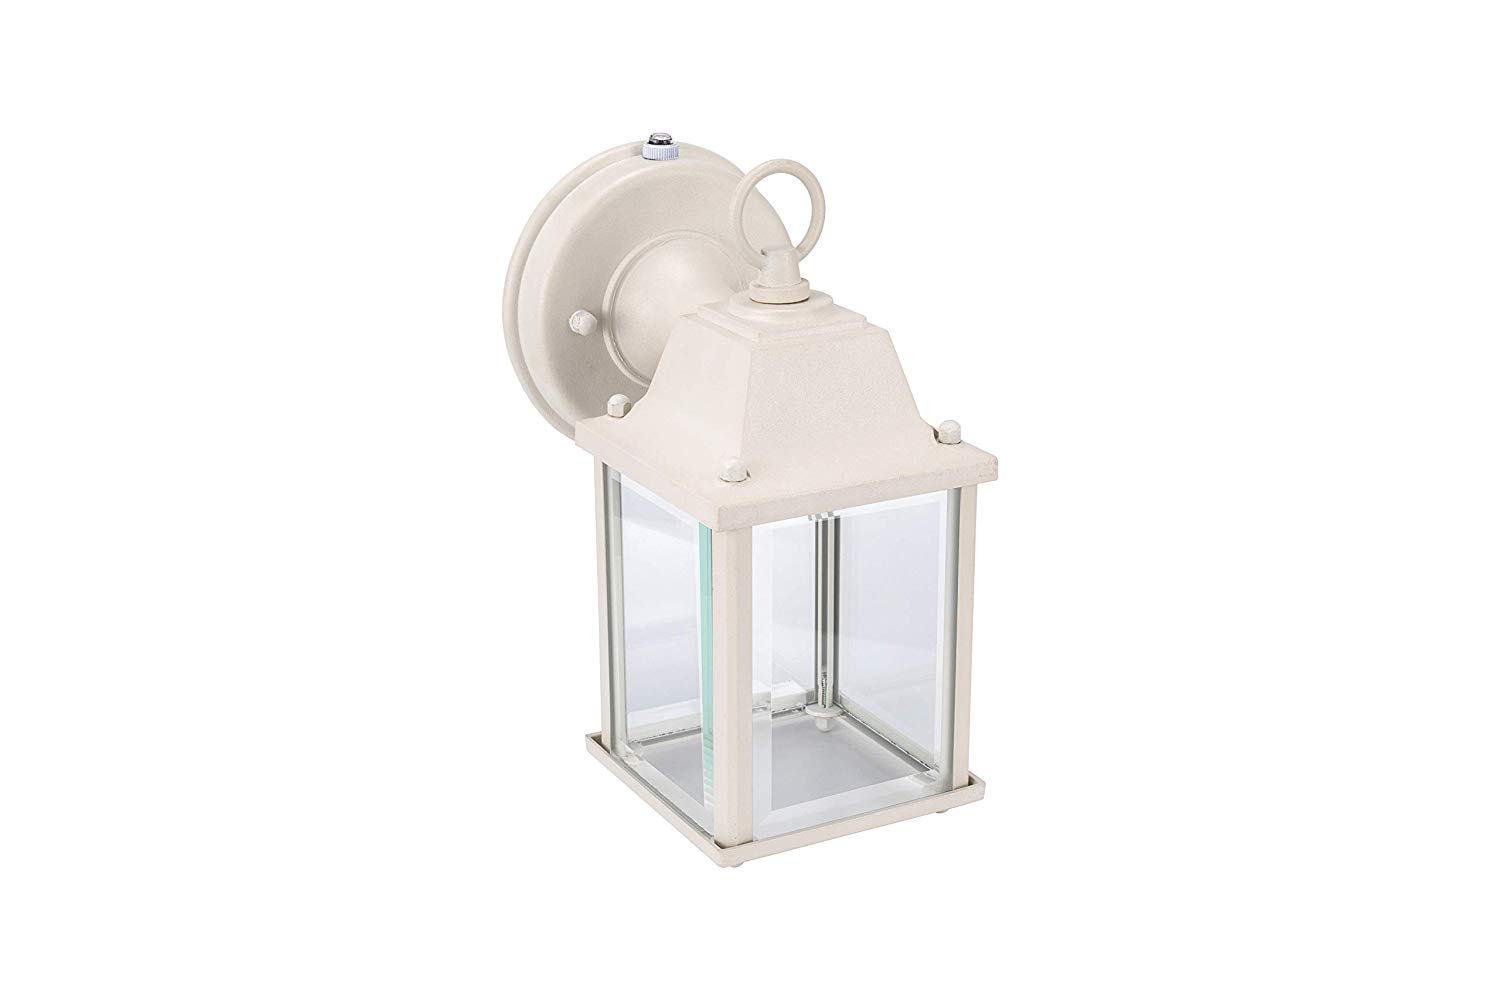 LIT-PaTH Small Outdoor LED Wall Lantern with Dusk to Dawn Photocell, 5000K Daylight White, 9.5W (75W Equivalent), 800 Lumen, Aluminum Housing Plus Glass, Outdoor Rated, 2-Pack (White)